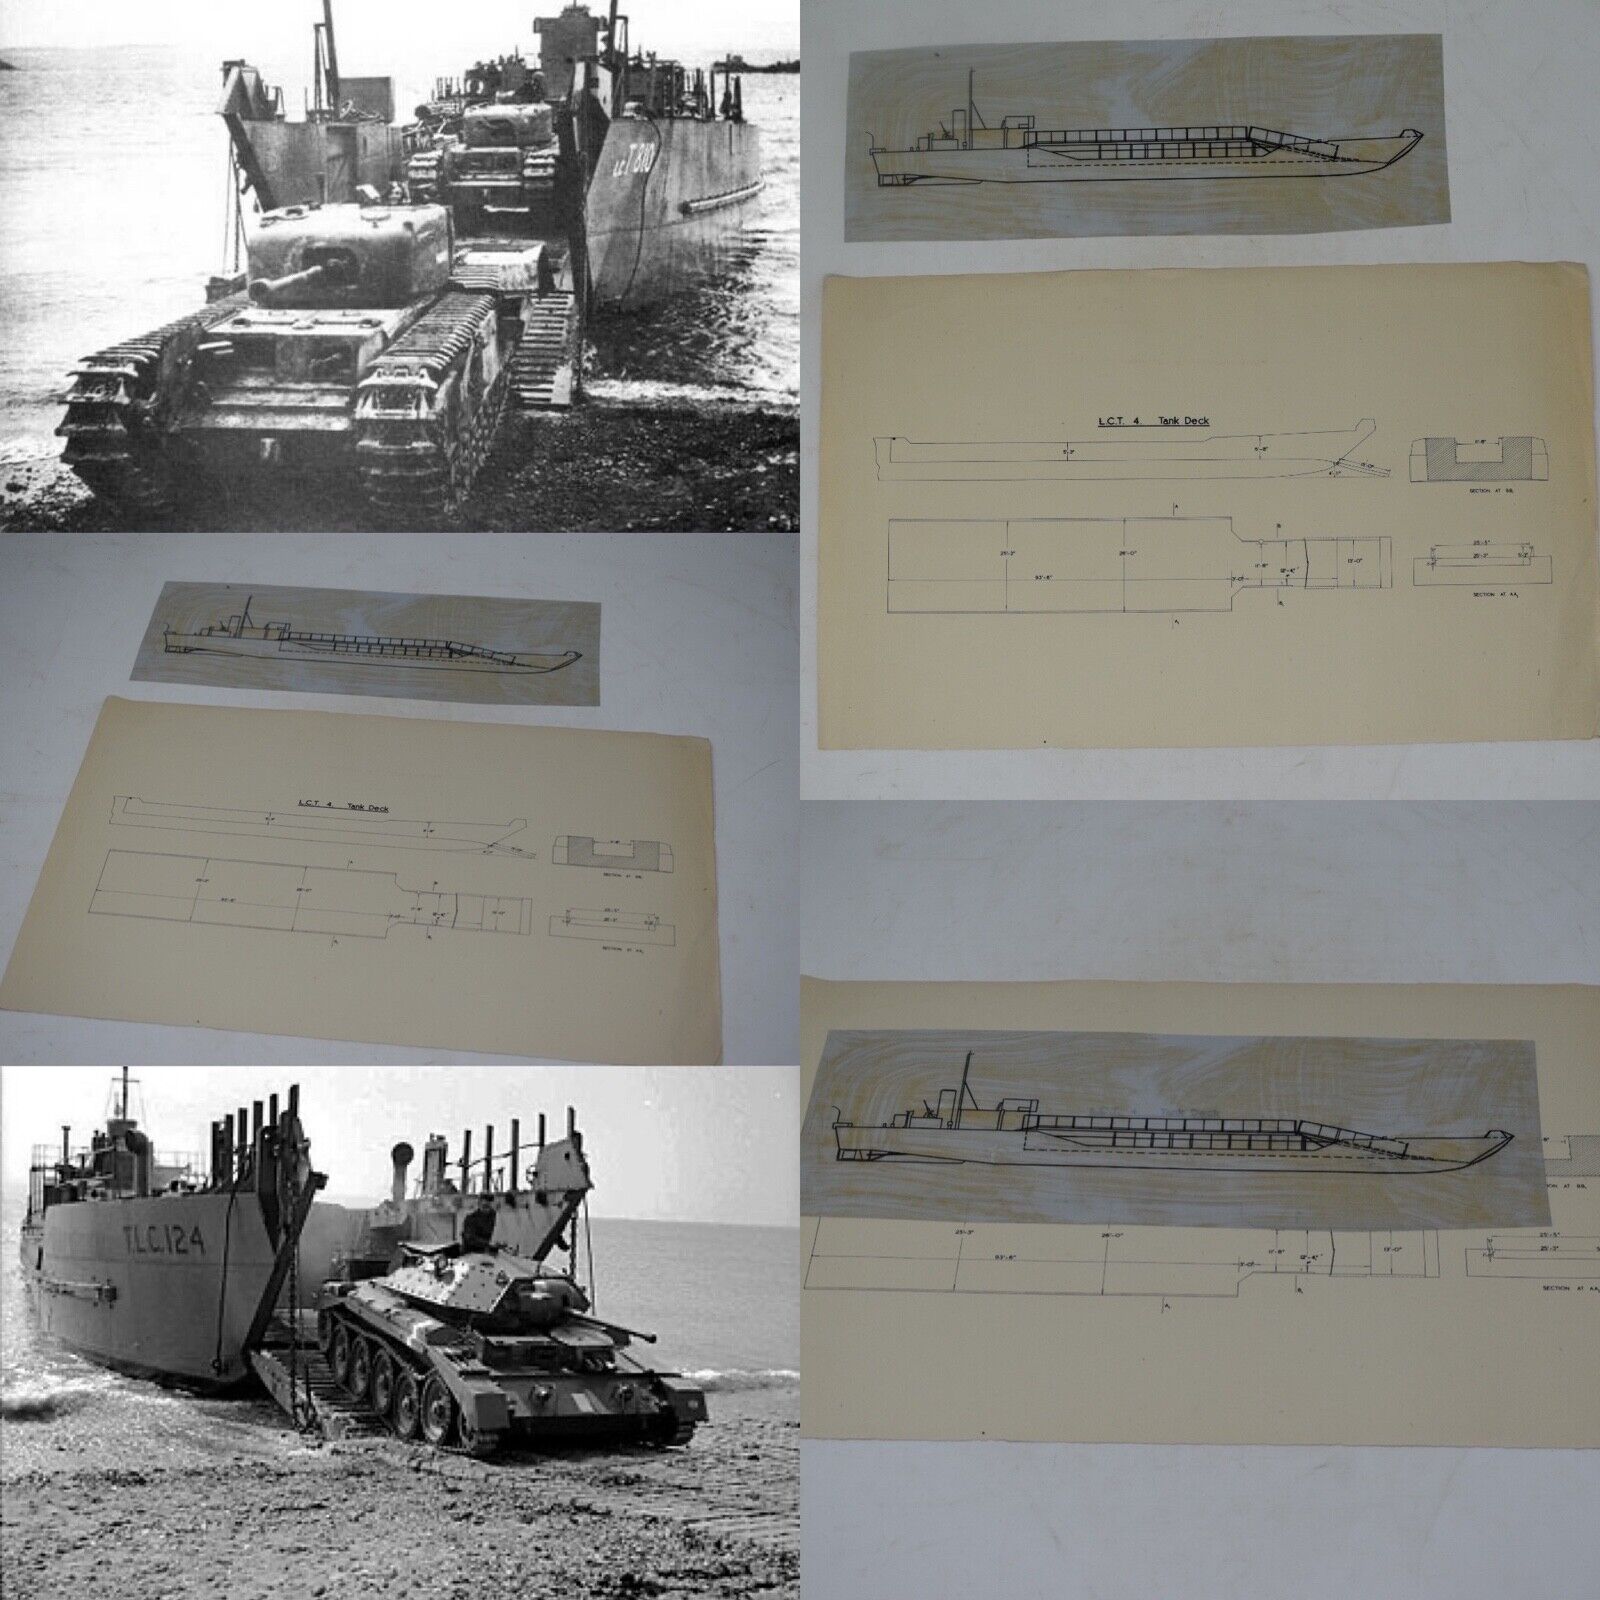 Rare WWII 1942 Classified British D-Day Landing Craft TLC IV Blueprint Lot Relic